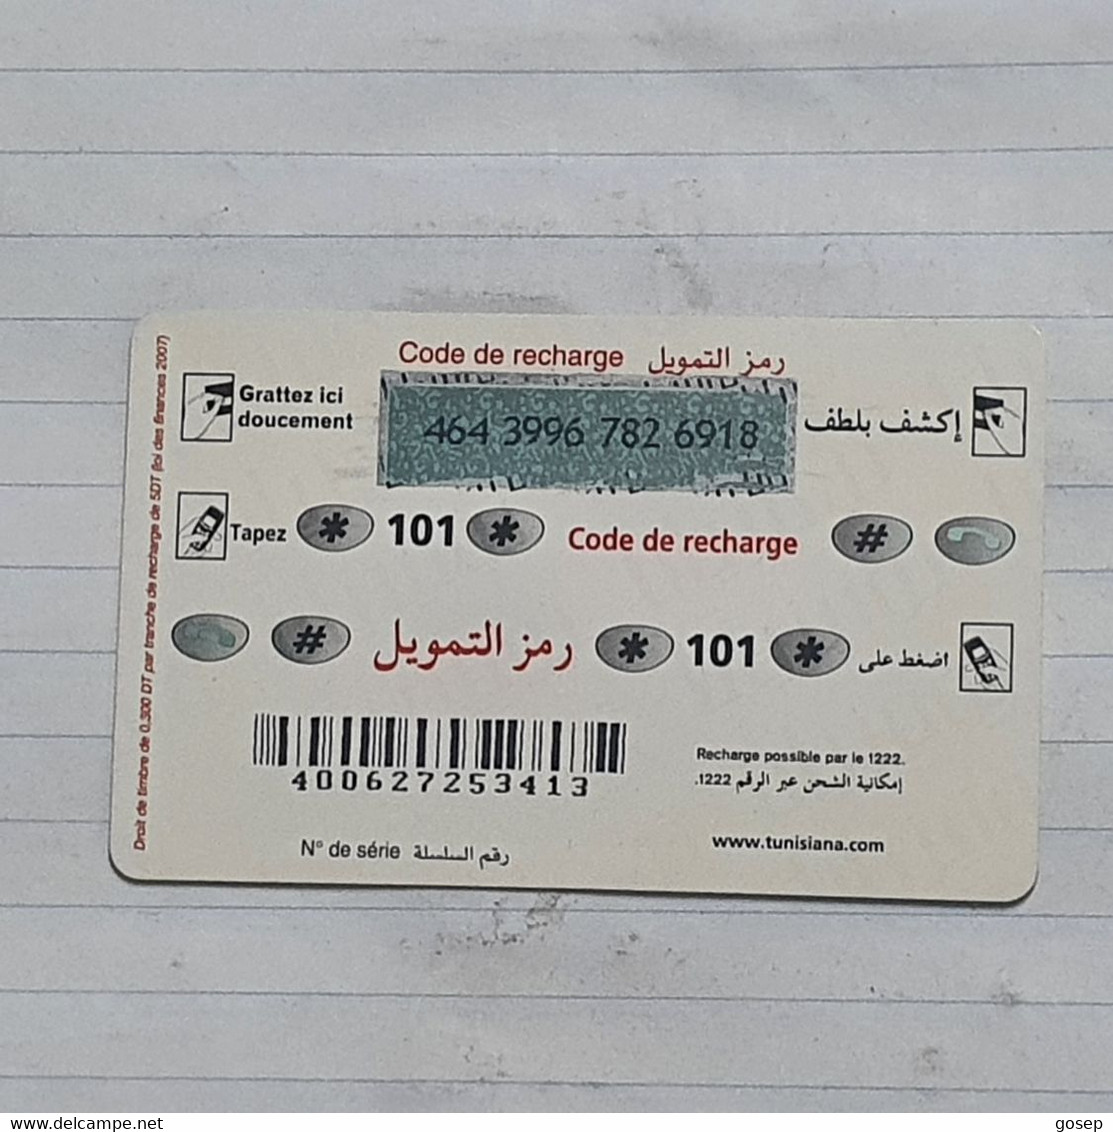 TUNISIA-(TUN-REF-TUN-22D)-GIRL IN CAR-(145)-(464-3996-782-6918)-(look From Out Side Card Barcode)-used Card - Tunisie